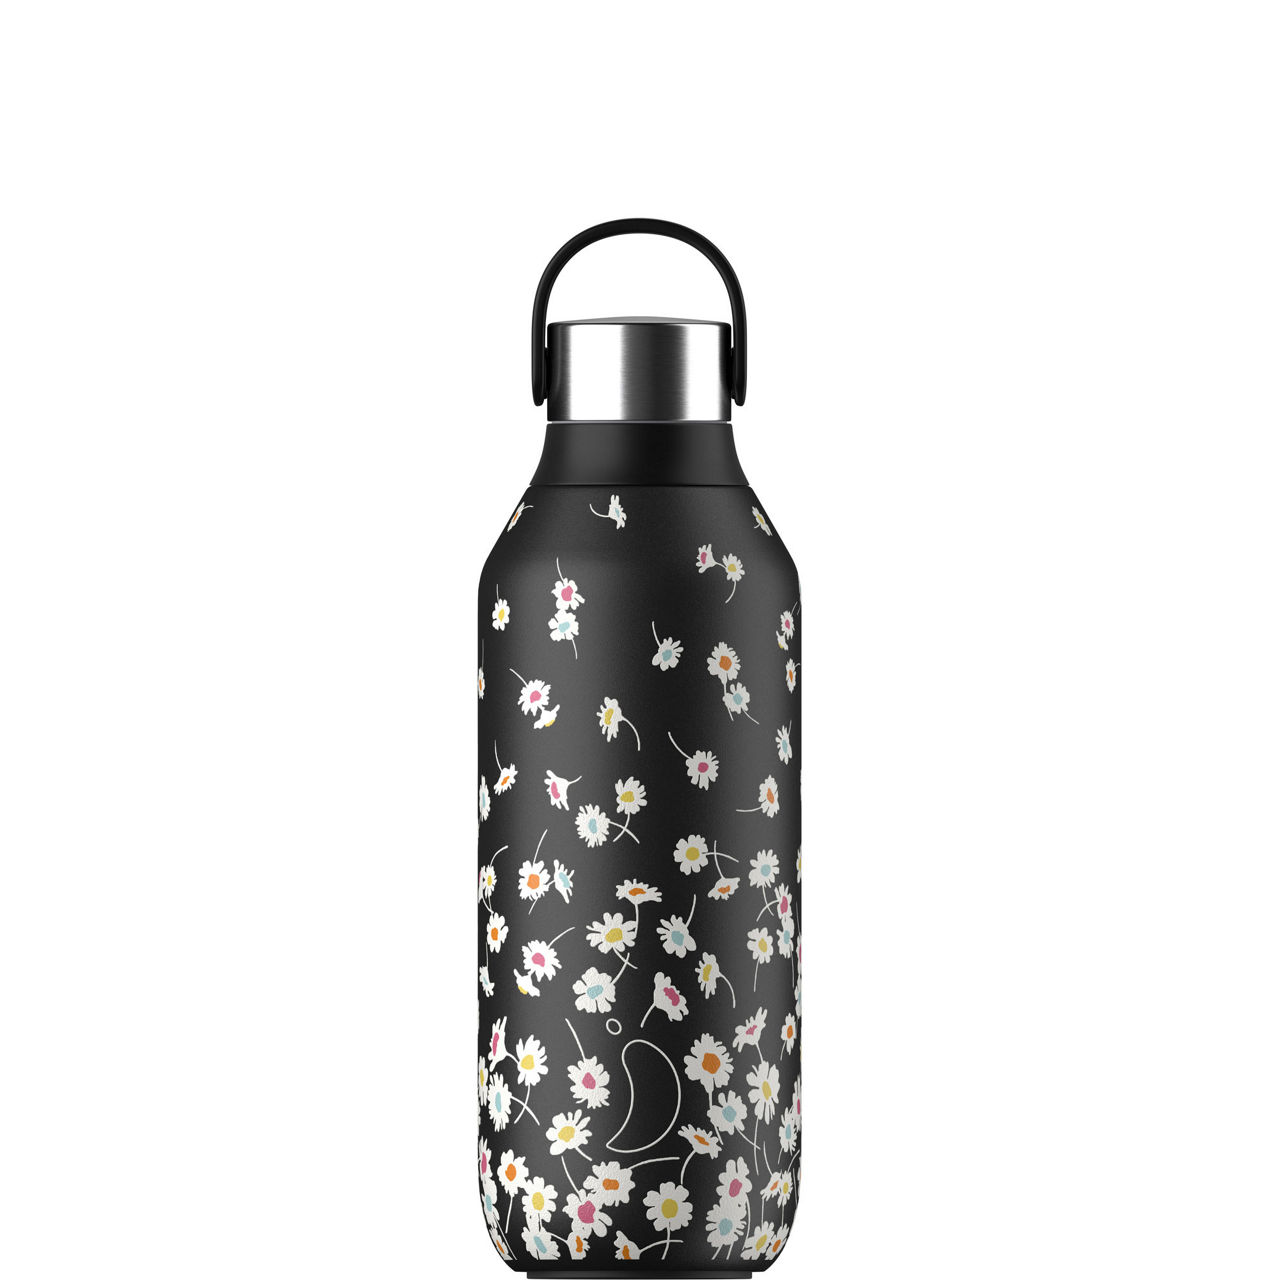 BOZ Kids Insulated Water Bottle with Straw Lid, Stainless Steel Double  Wall-Space, 1 - Ralphs